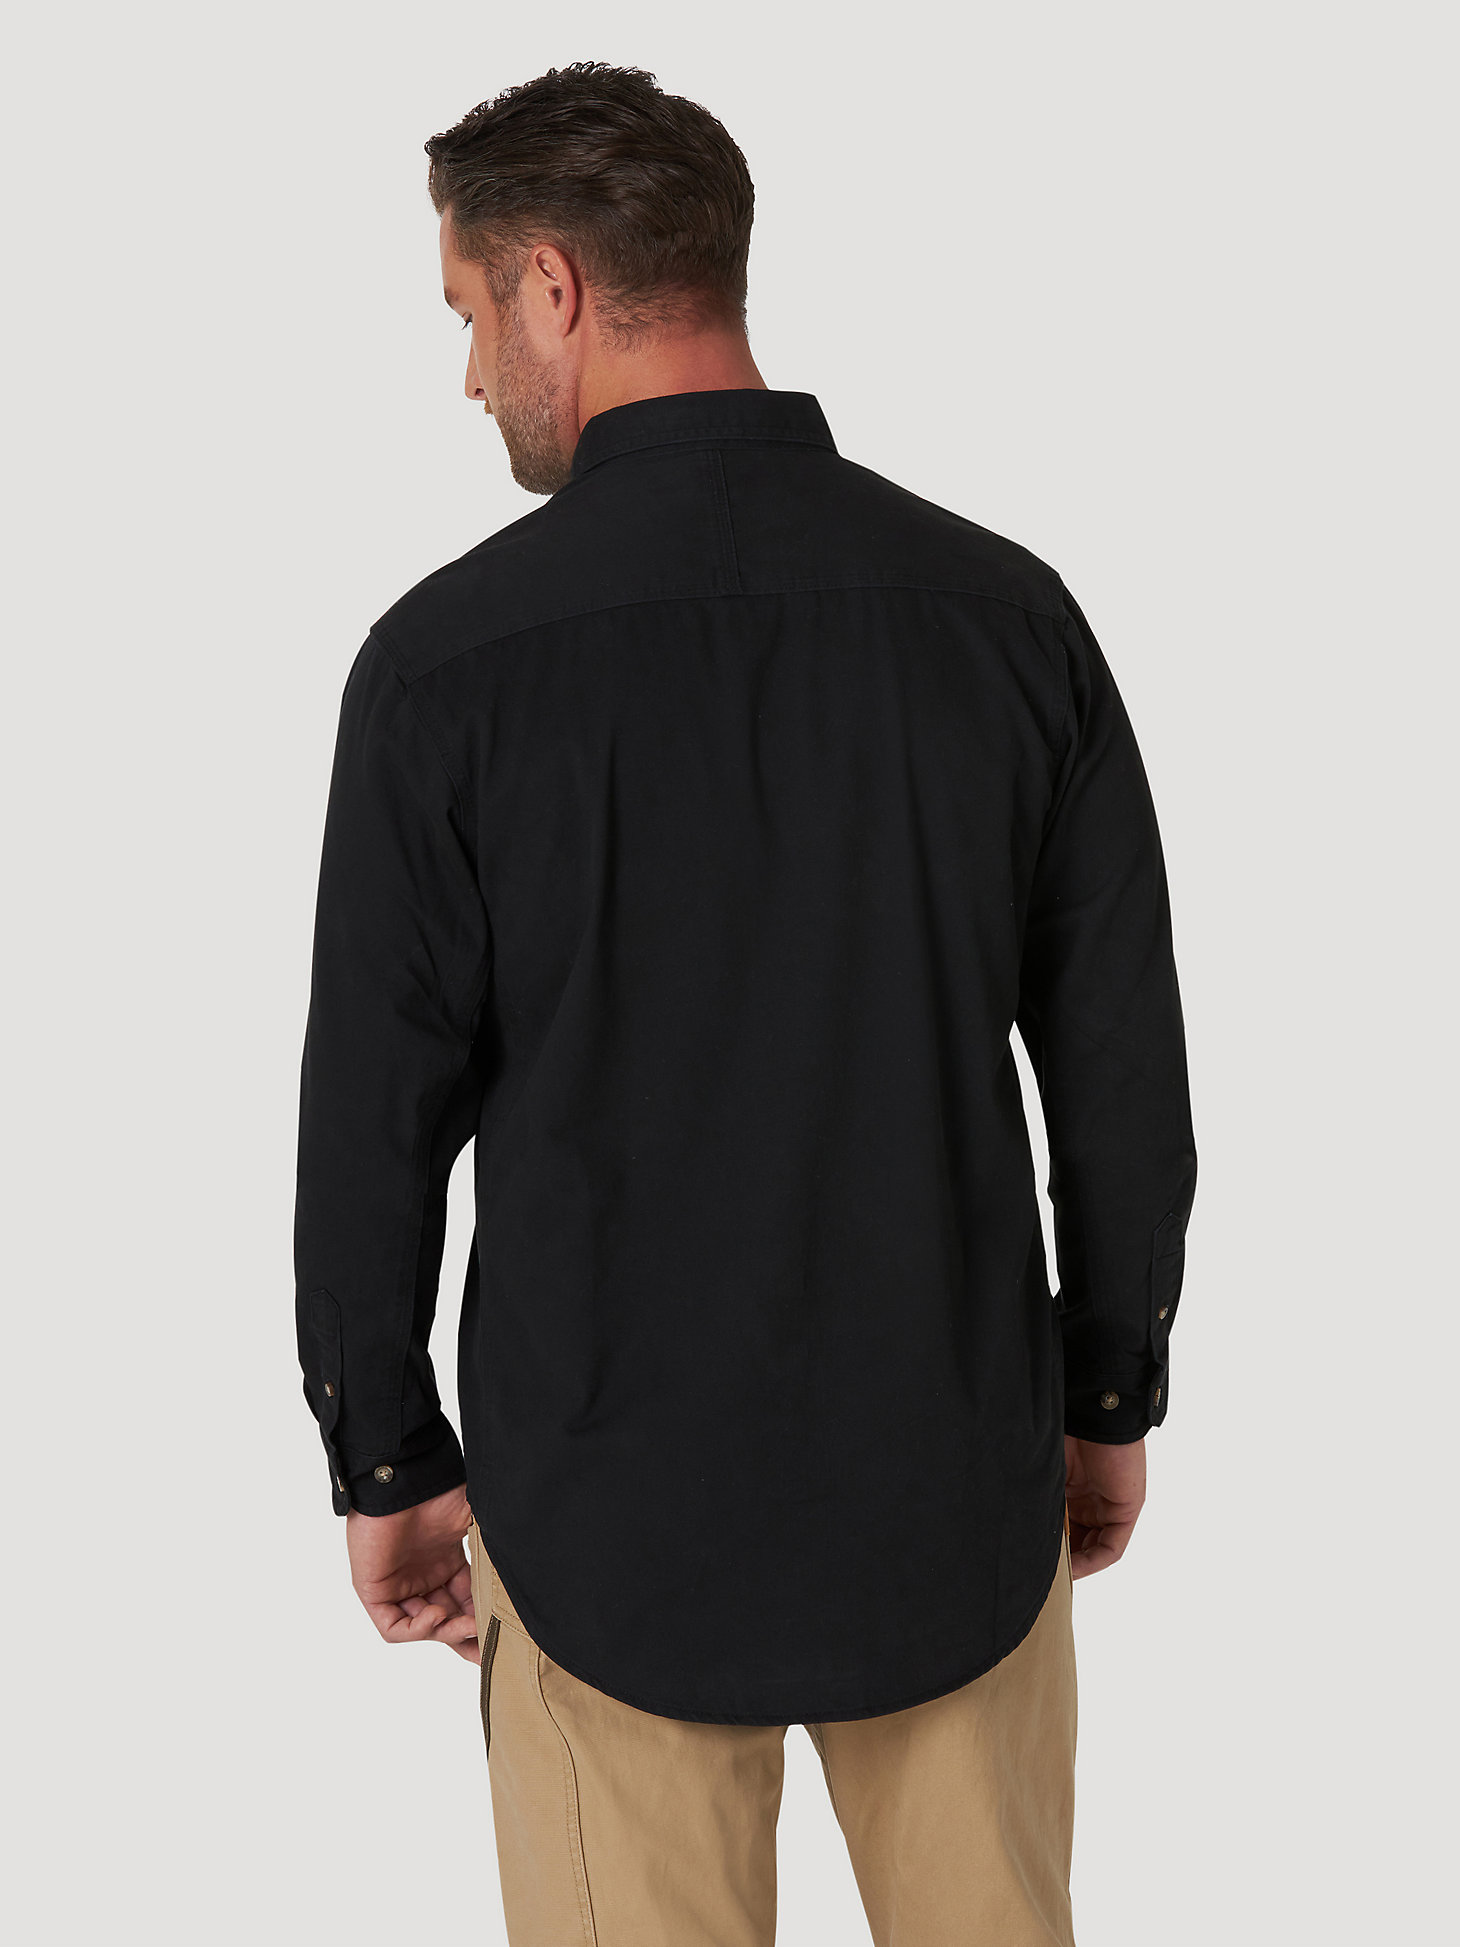 Wrangler® RIGGS Workwear® Long Sleeve Button Down Solid Twill Work Shirt in Black alternative view 1